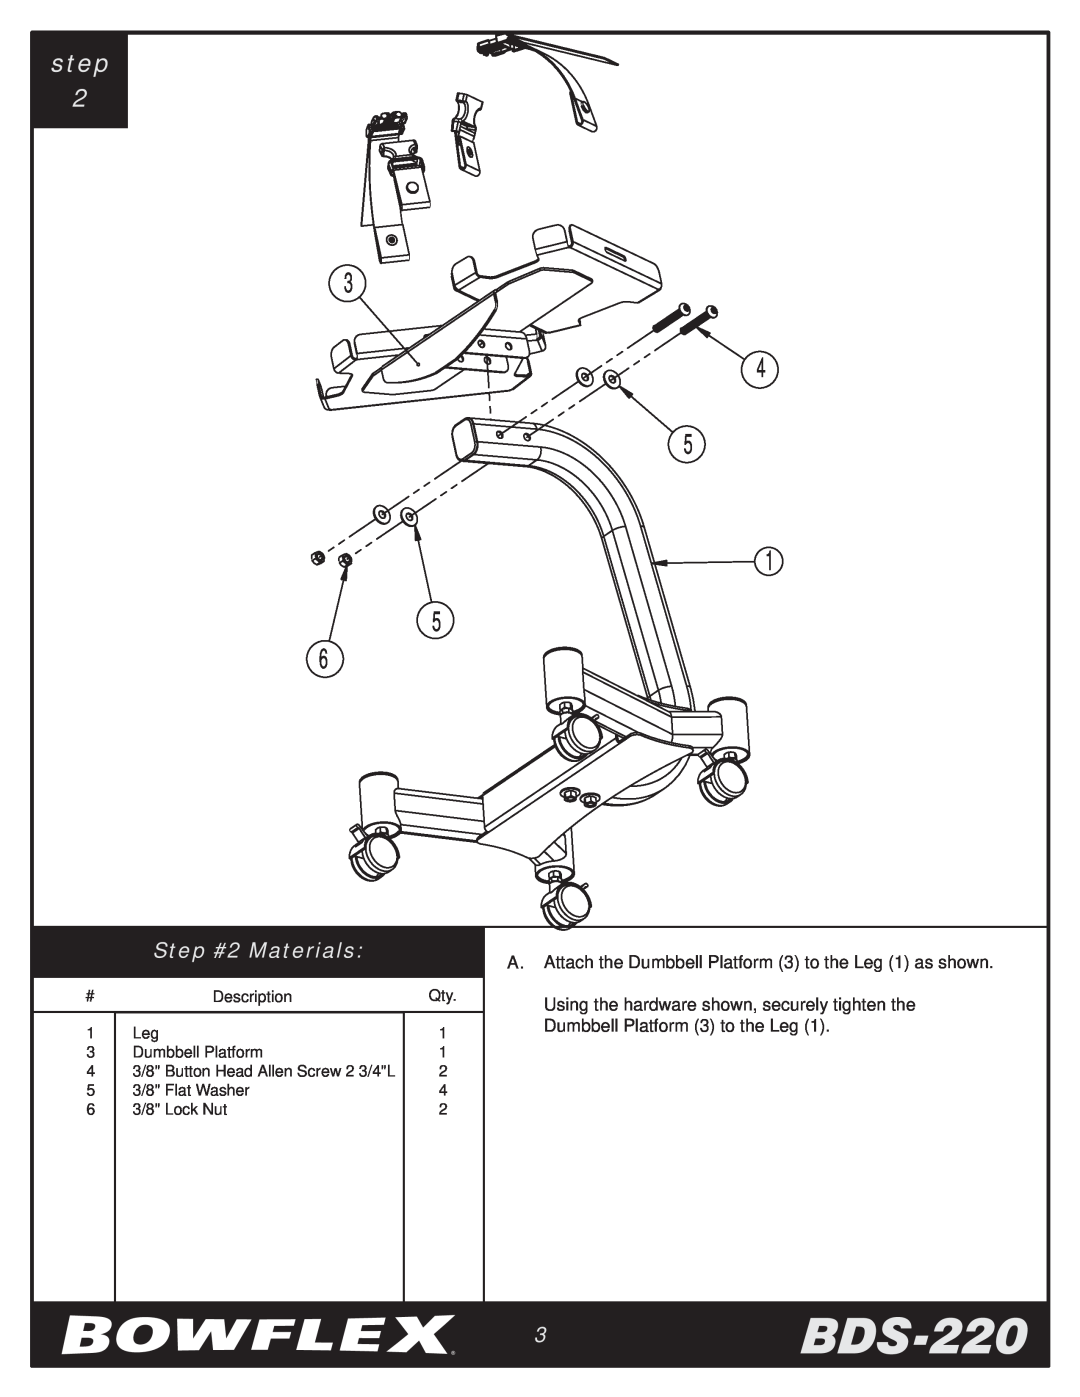 Bowflex manual 3BDS-220, step, Step #2 Materials, A. Attach the Dumbbell Platform 3 to the Leg 1 as shown 